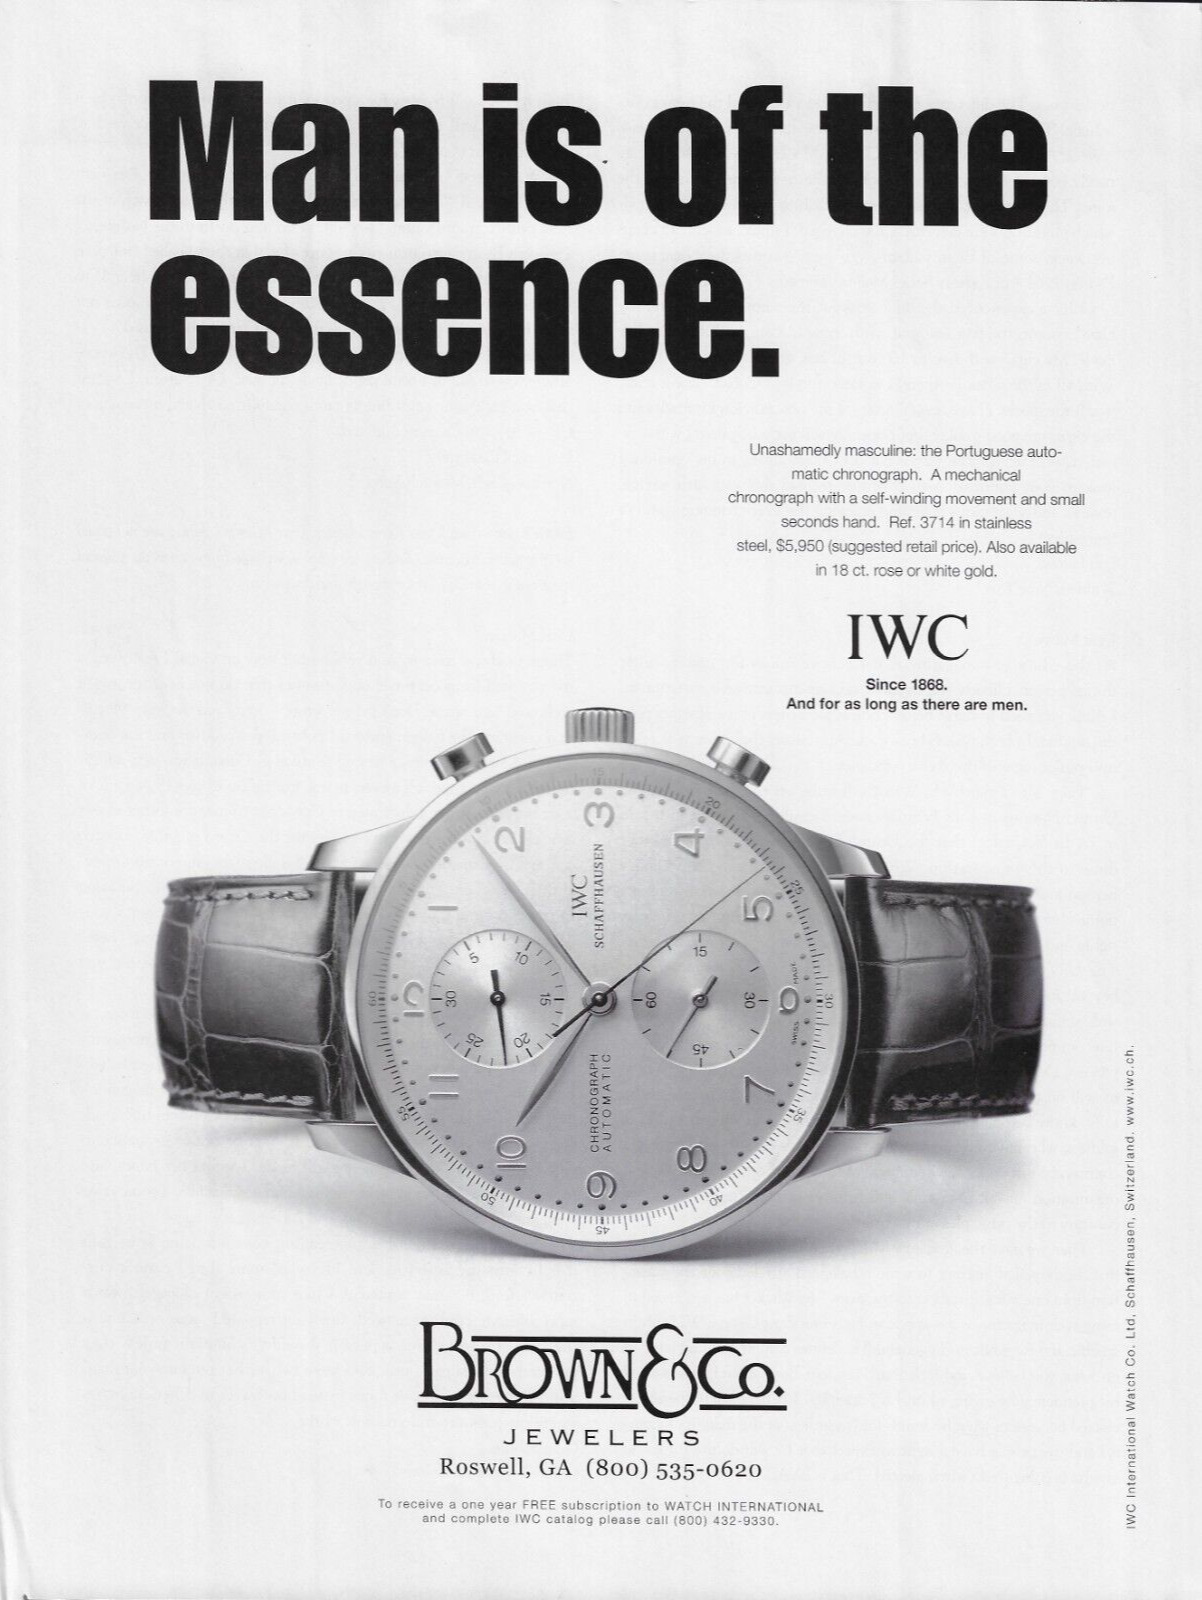 2001 IWC International Watch Co D Man is of the Essence Photo Vintage Print Ad x